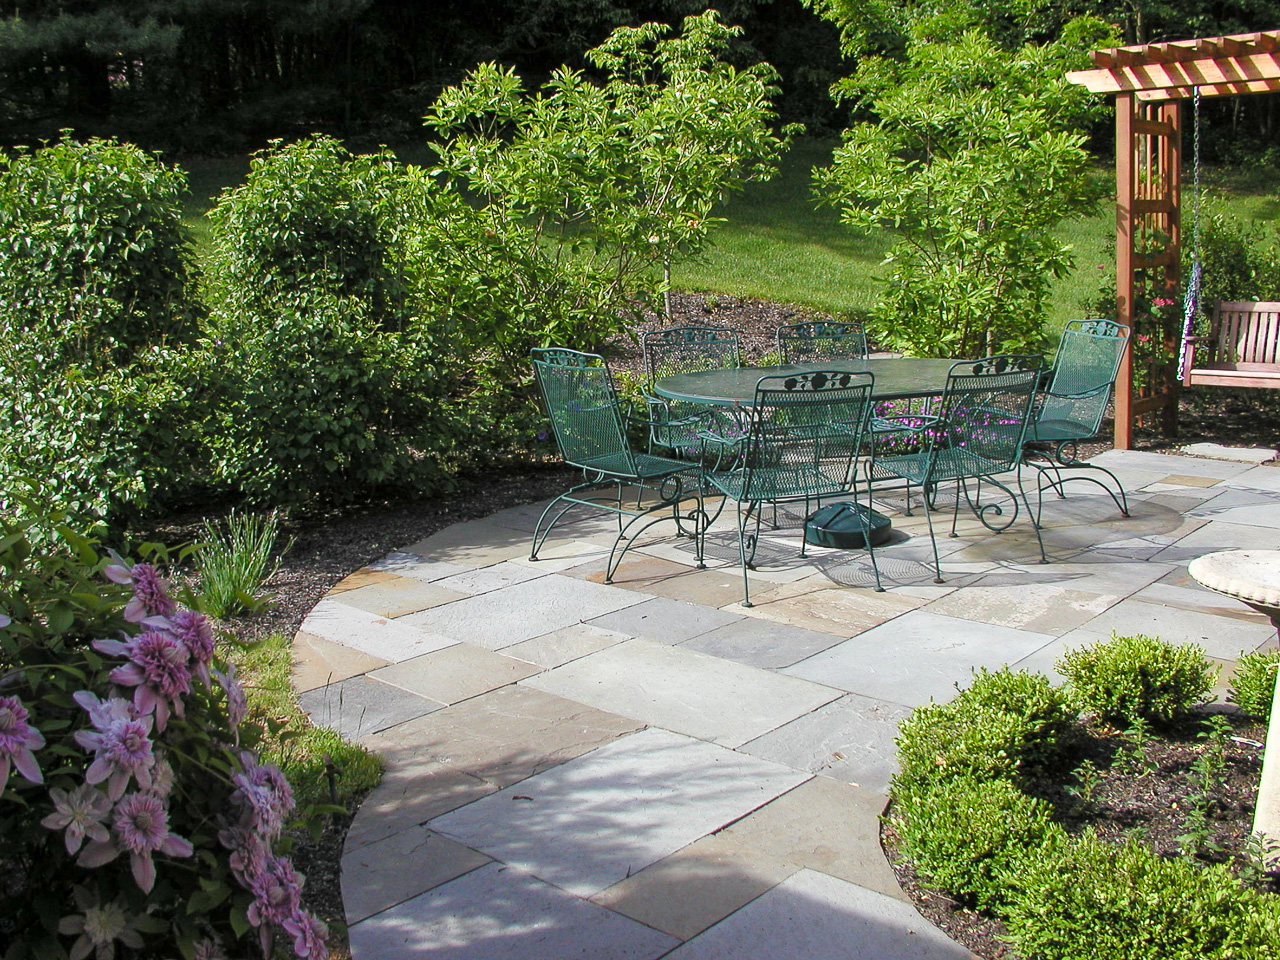 Flagstone patio area with adjacent arbor for a bench swing